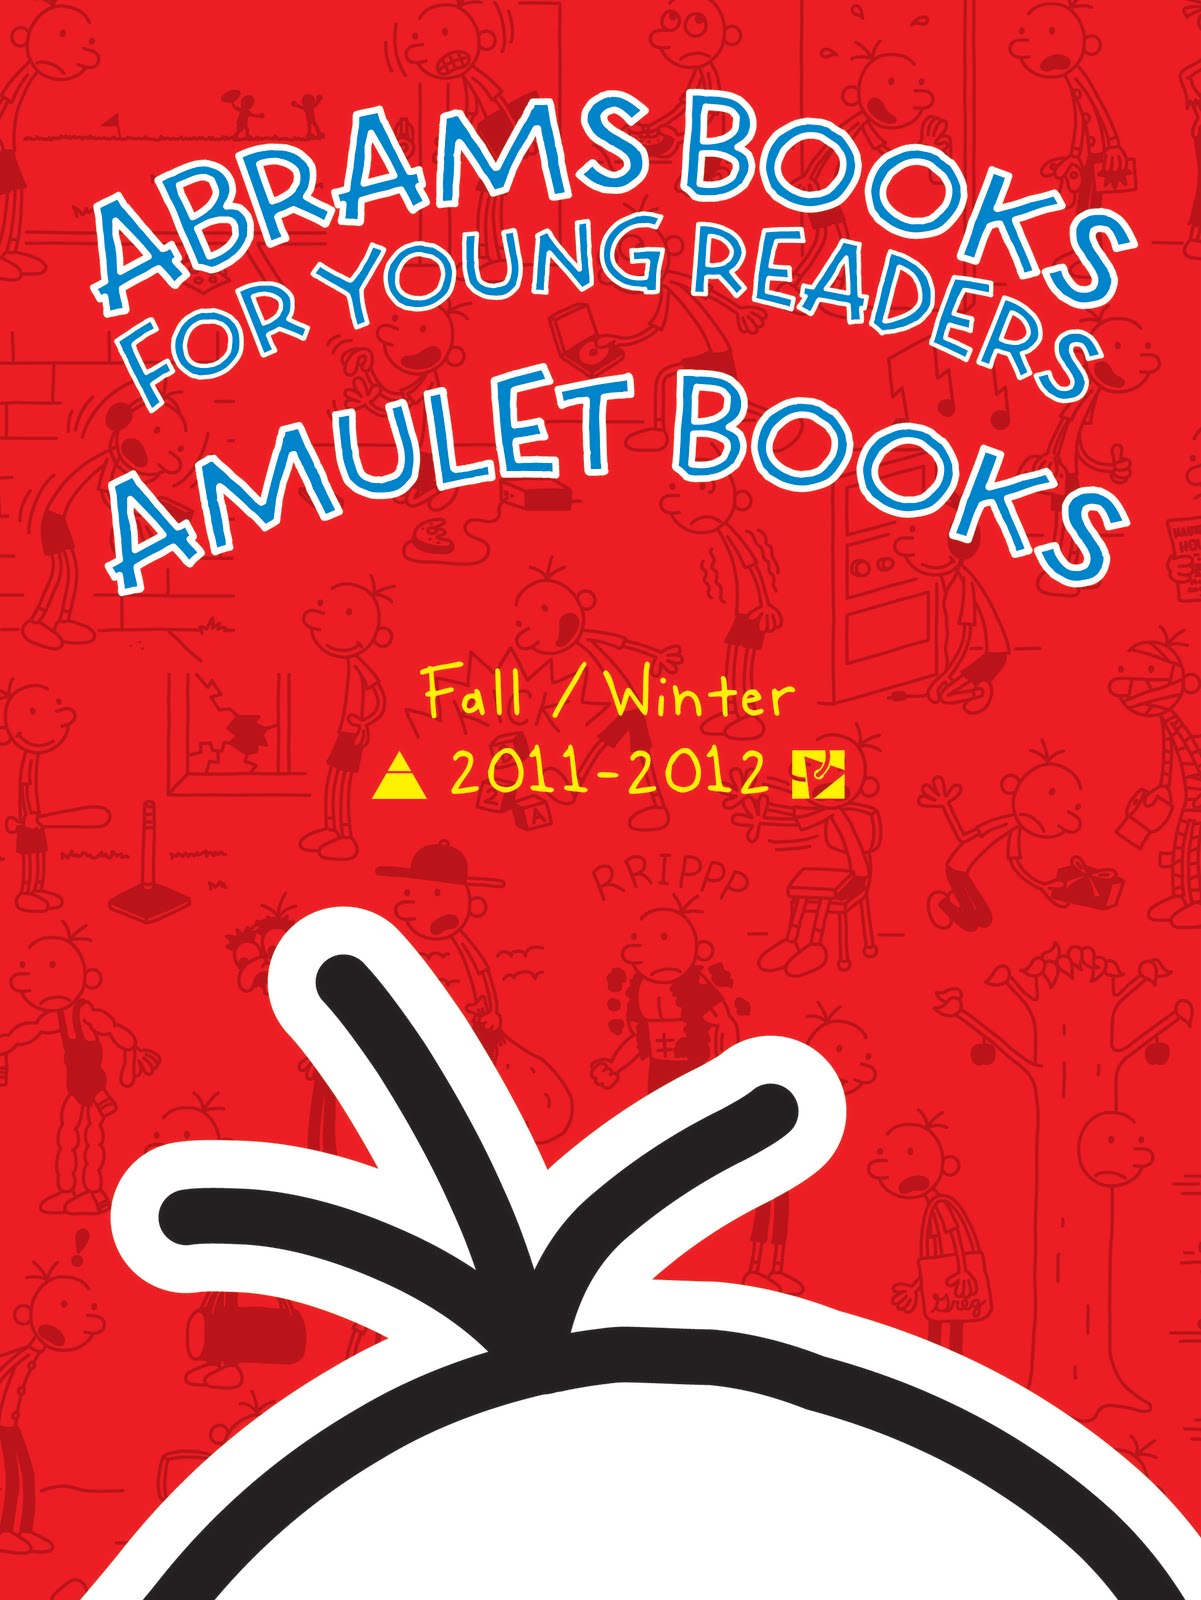 Mishaps and Adventures Amulet Books Fall 2011 Preview